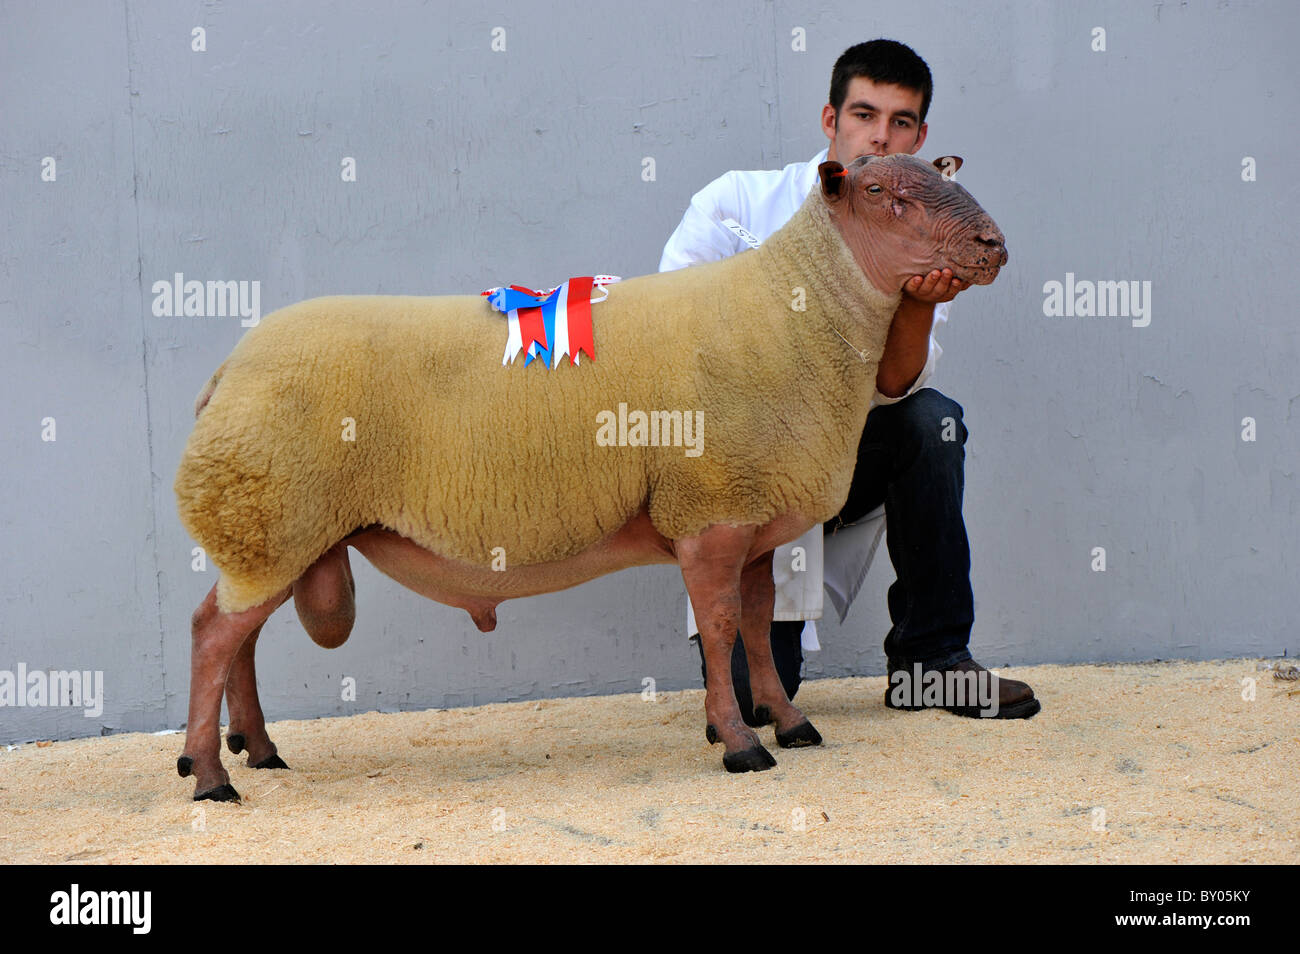 Rouge de L'Ouest champion ram at a sale, being held by shepherd Stock Photo  - Alamy